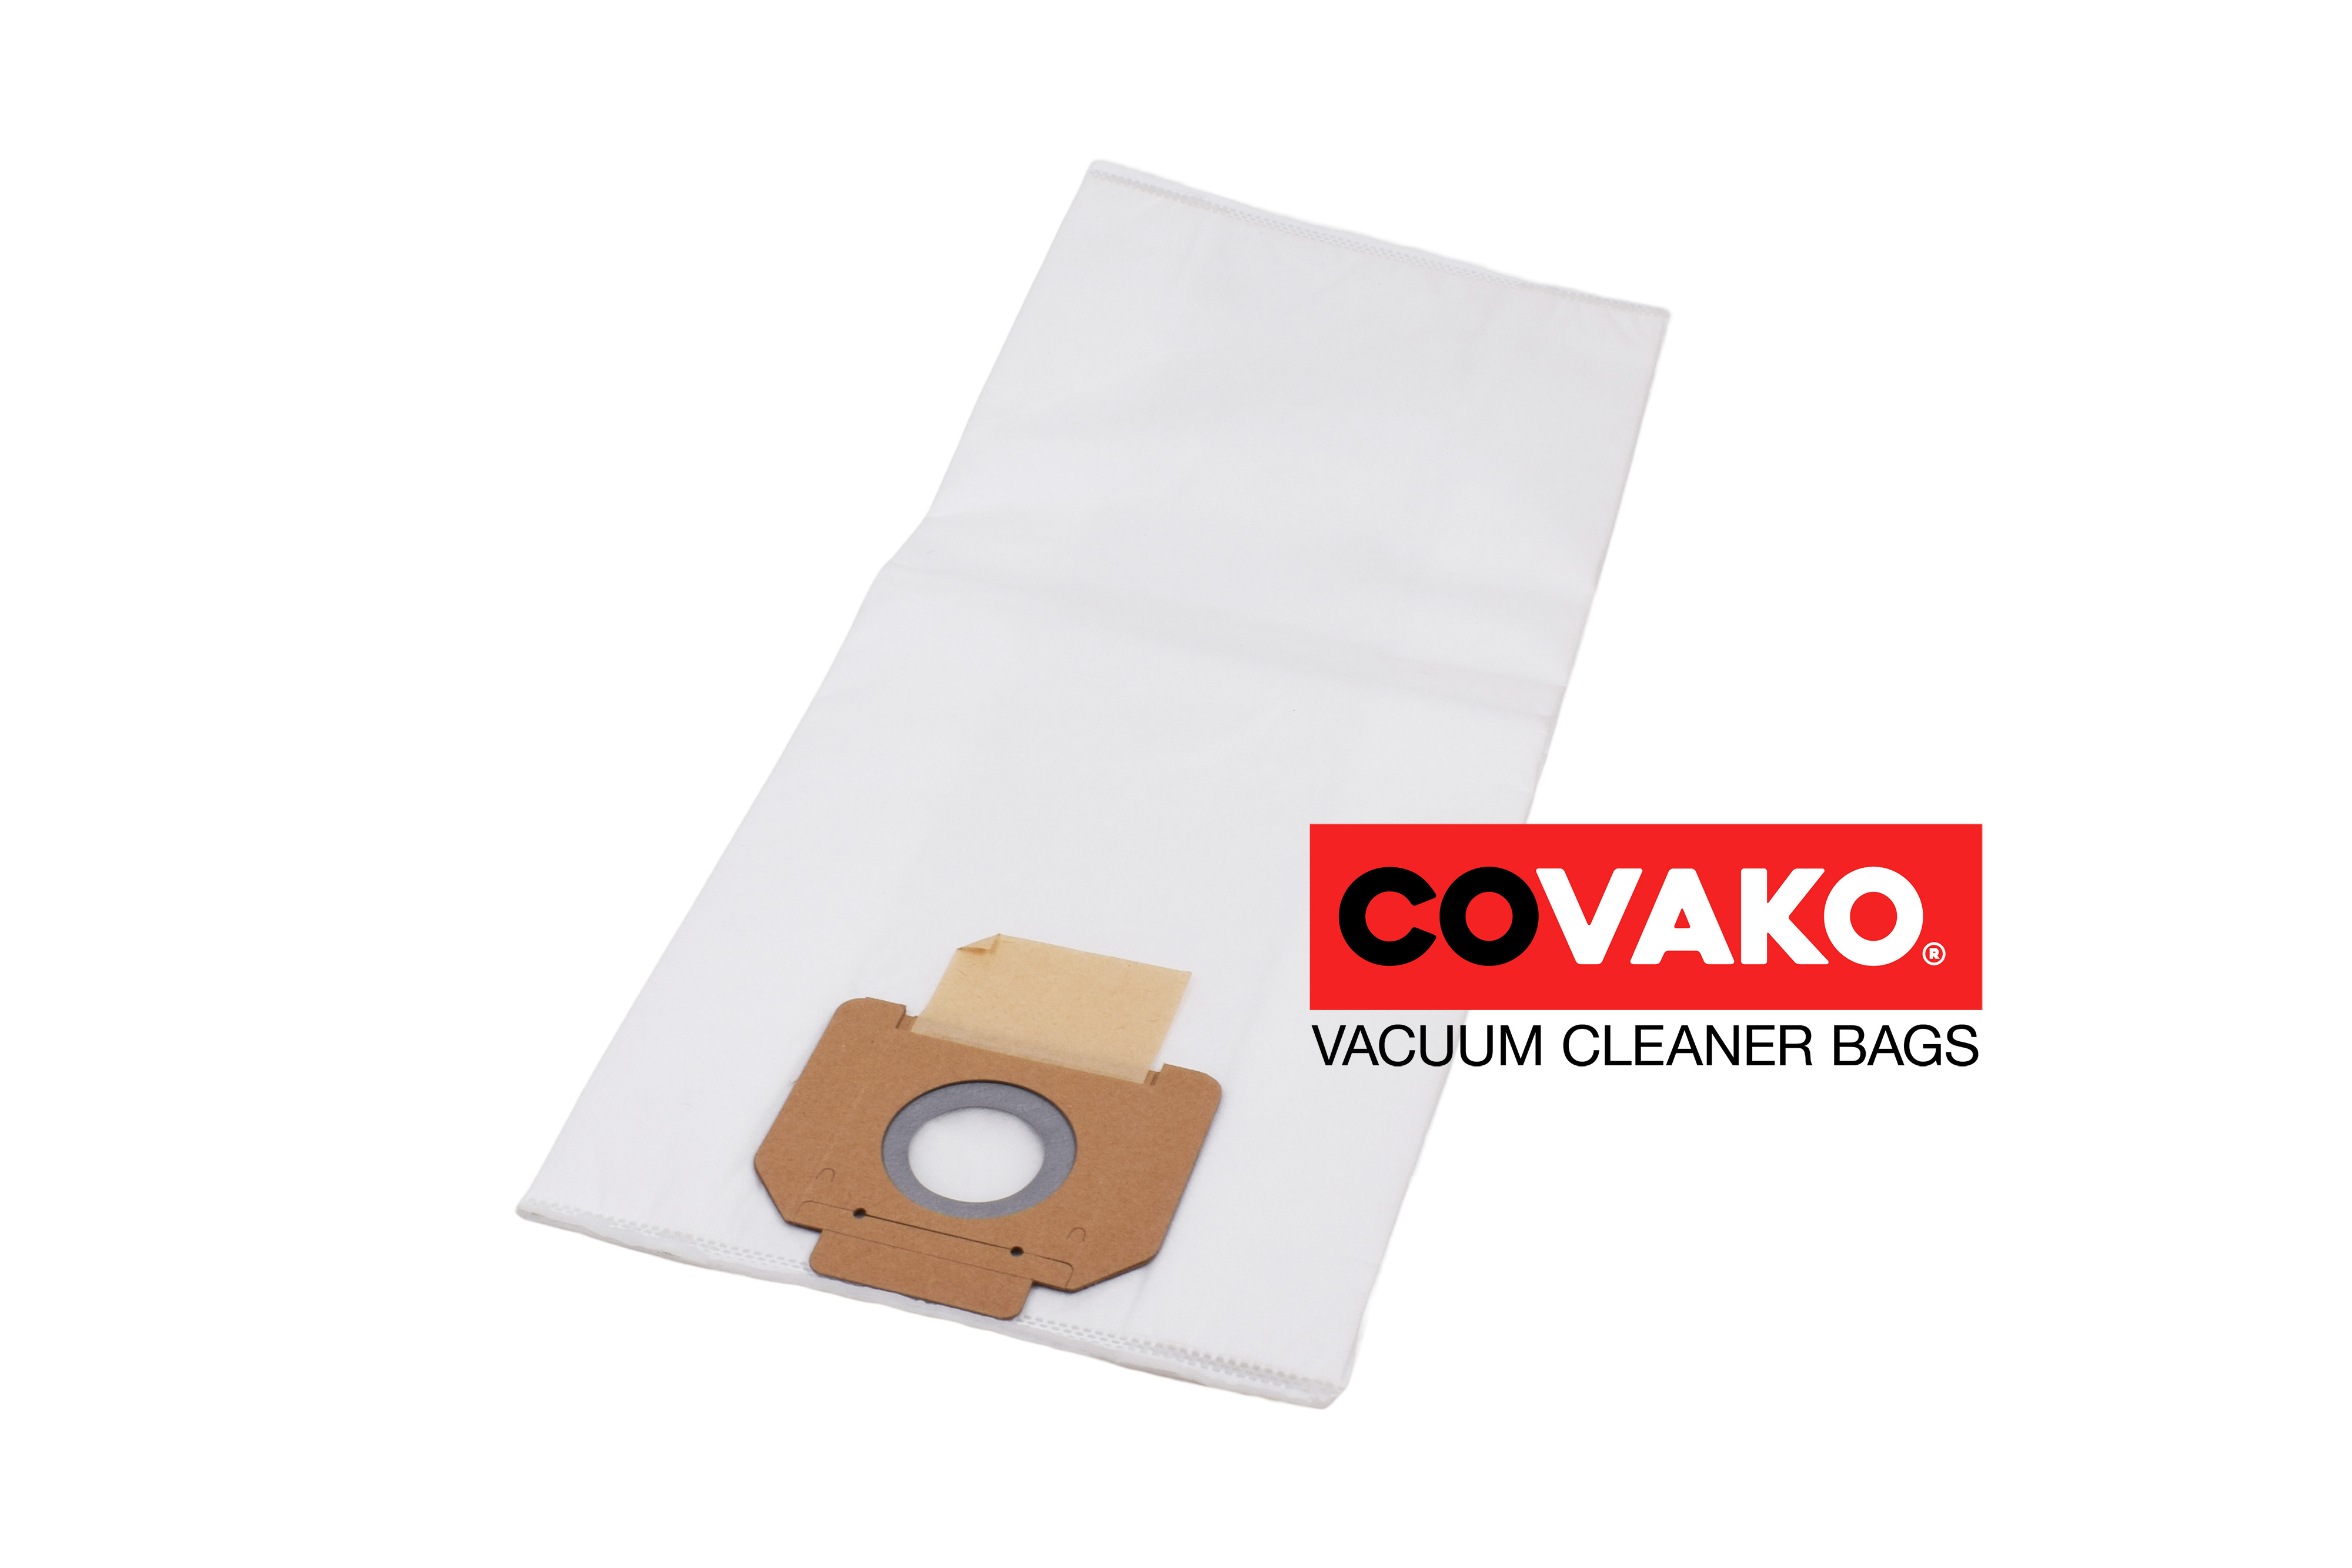 Einhell TE-VC 2340 SAC / Synthesis - Einhell vacuum cleaner bags